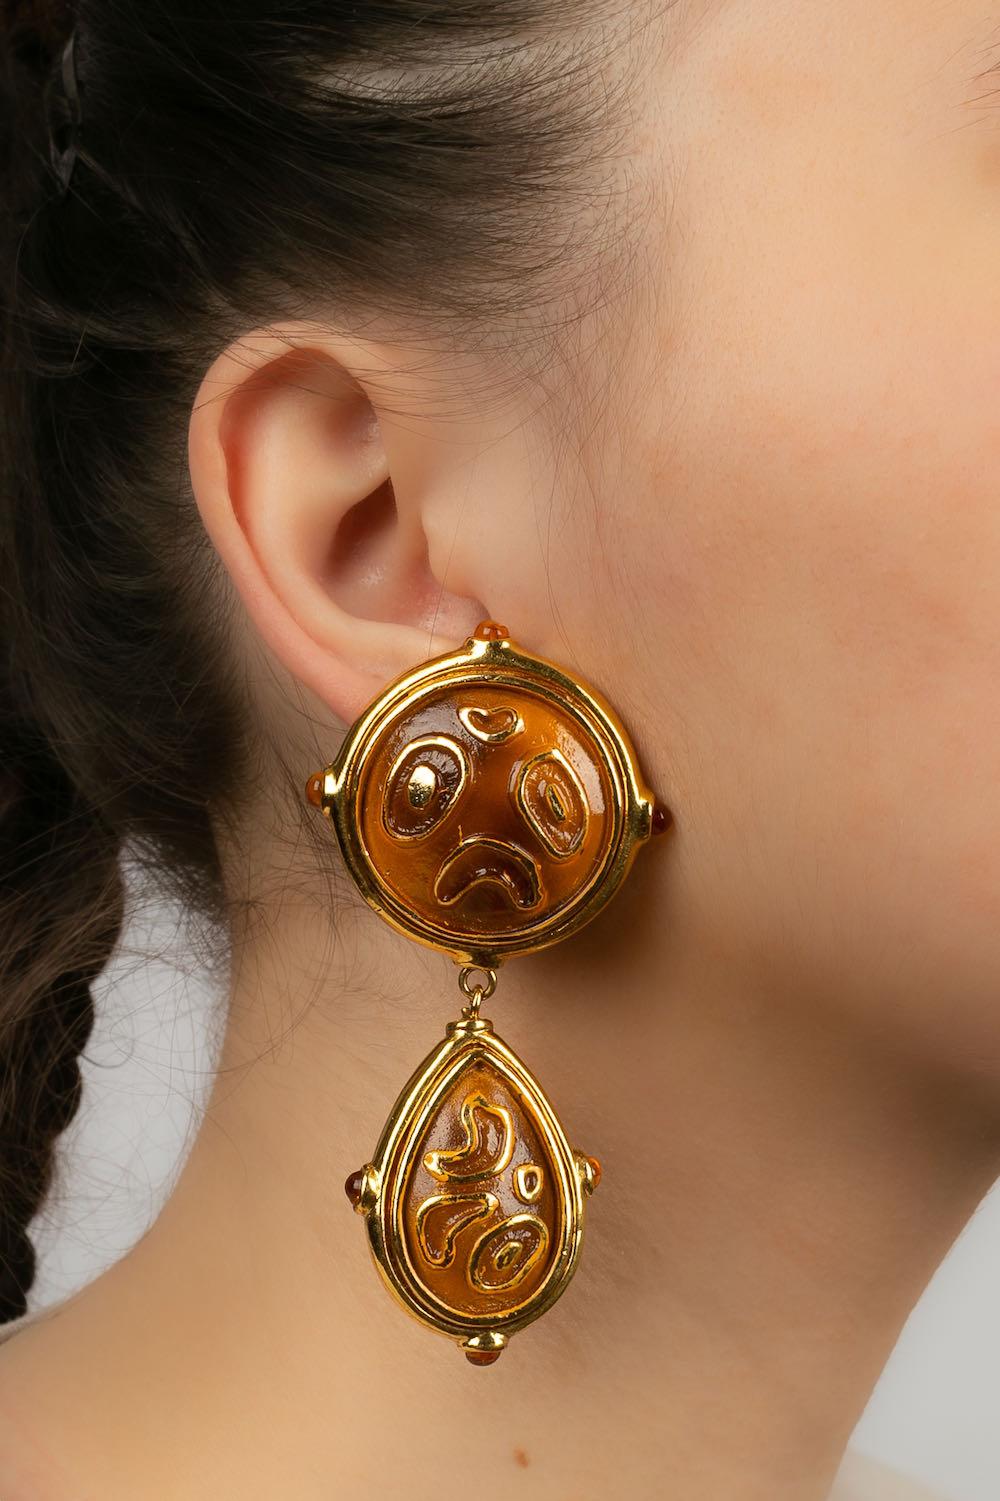 Valentino -Golden enamelled metal clip earrings.

Additional information:
Dimensions: 8 H cm
Condition: Very good condition
Seller Ref number: BO324